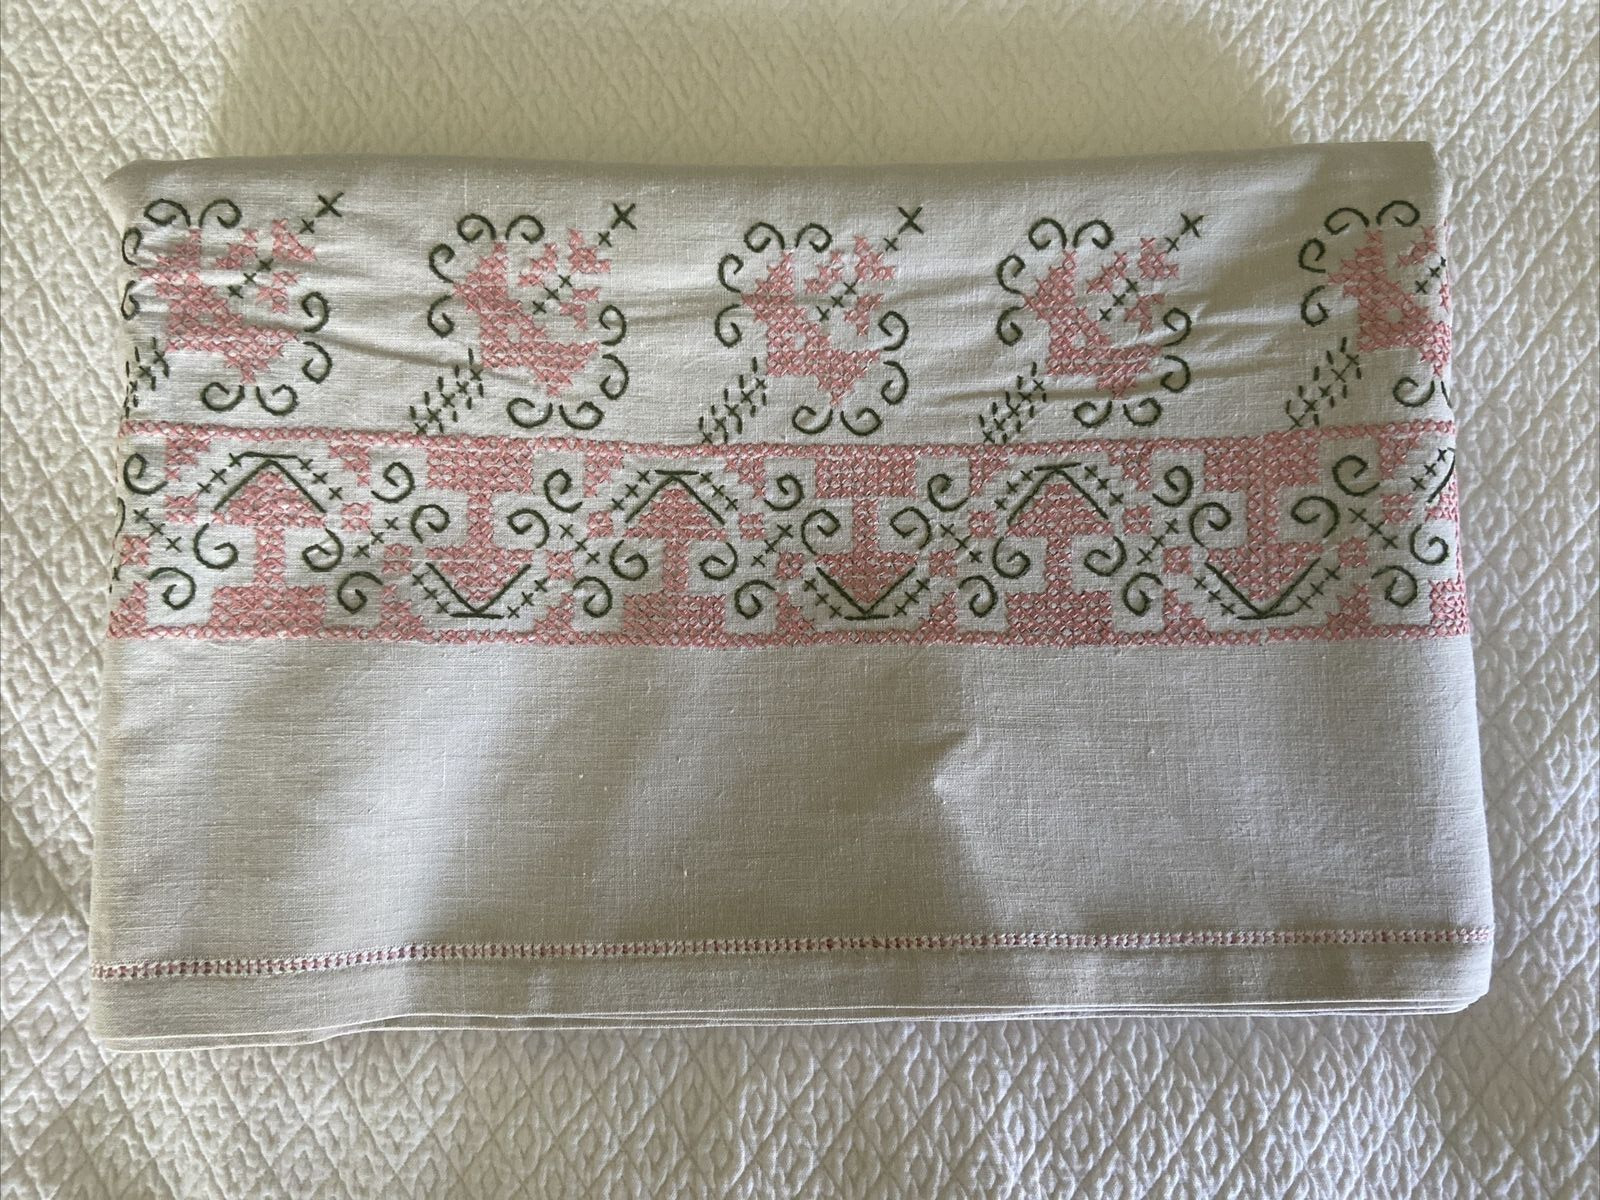 Gorgeous Vintage New Unused Linen Embroidered Tablecloth Pink Green on Cream